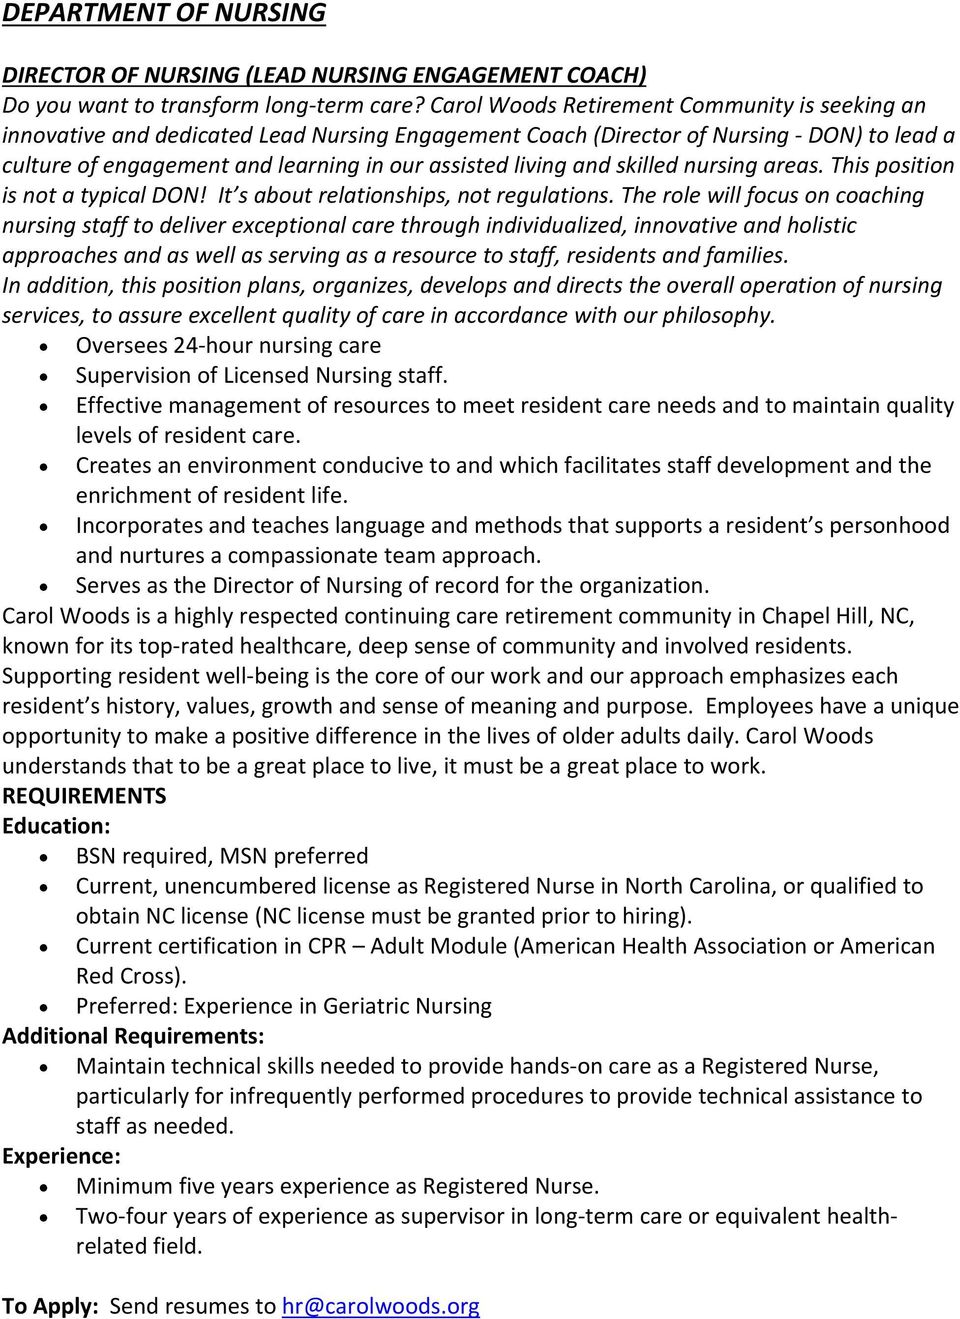 skilled nursing areas. This position is not a typical DON! It s about relationships, not regulations.